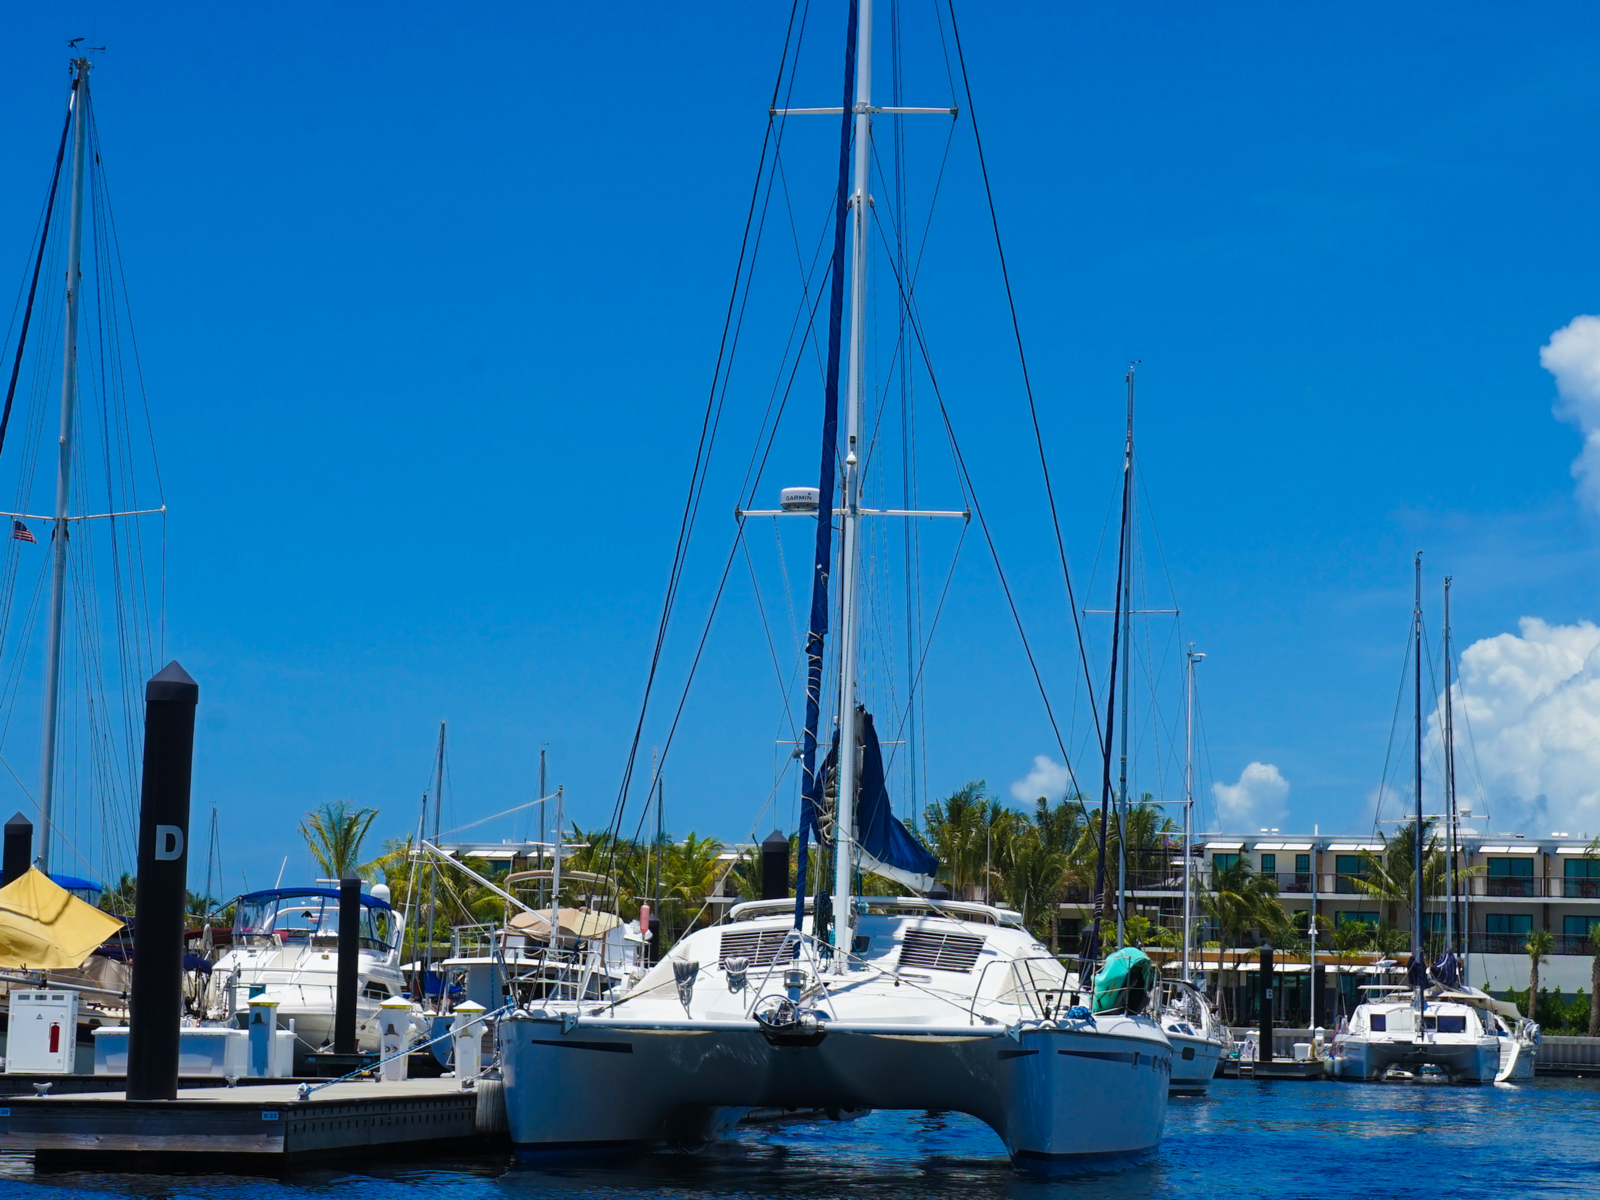 Several white colored boats docked near Fun in the Sun Private Charters during a clear sunny day, one of the best things to do in Key West